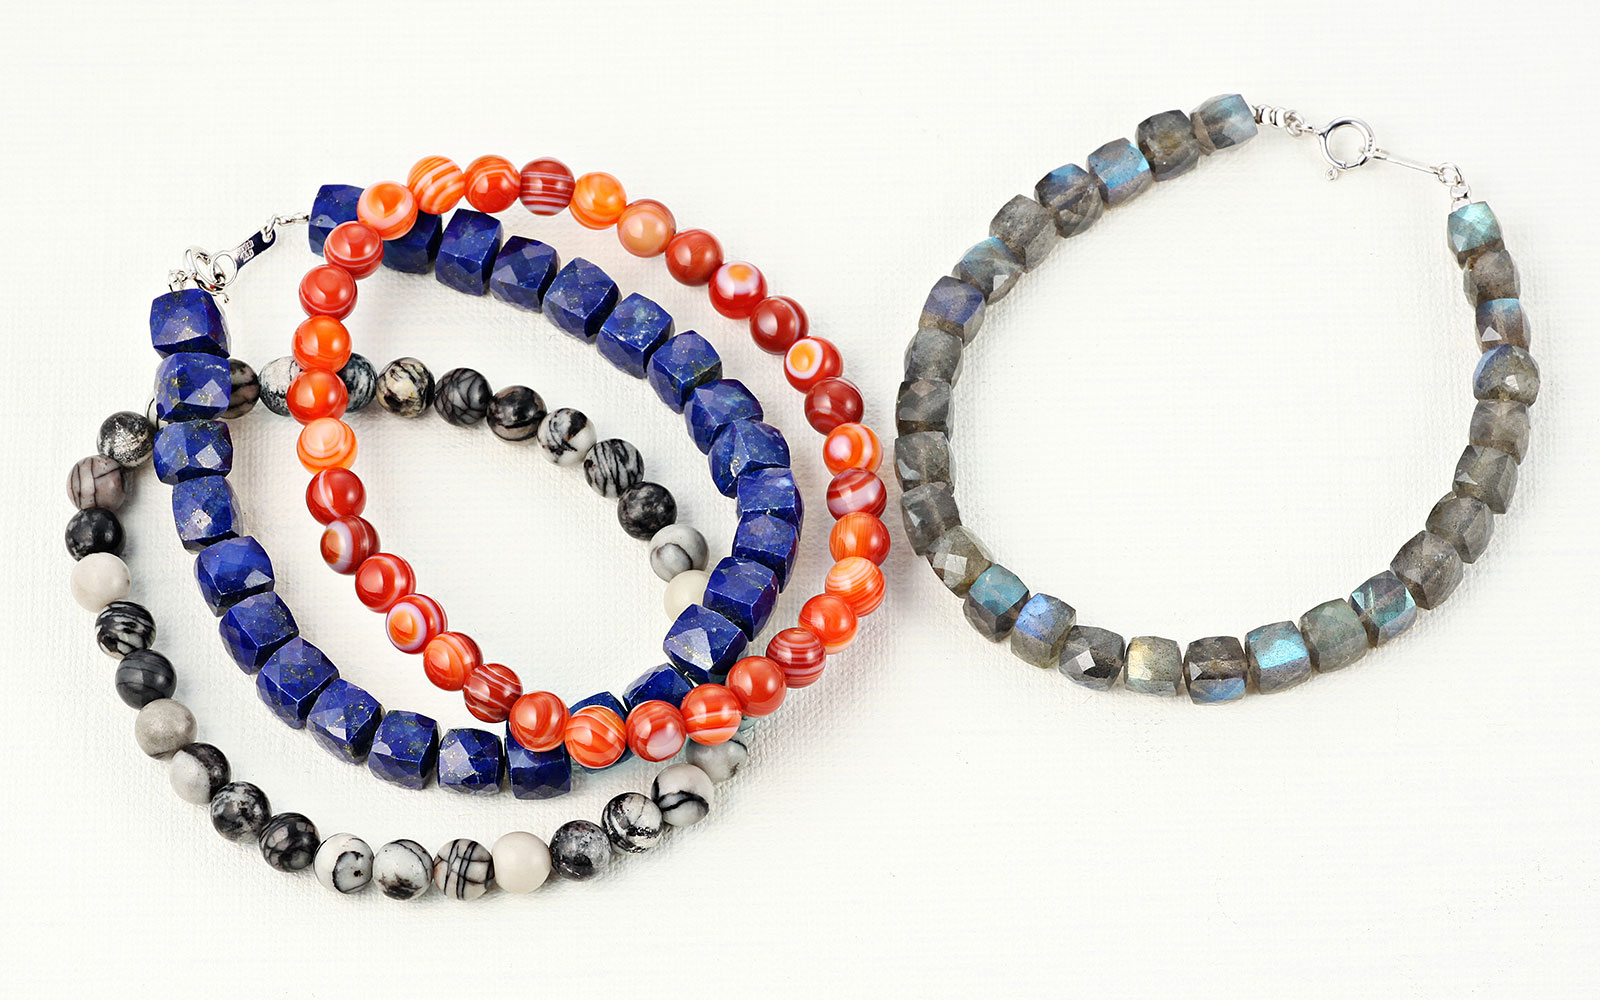 4 SEASONS JEWELRY：Color Stone Collection